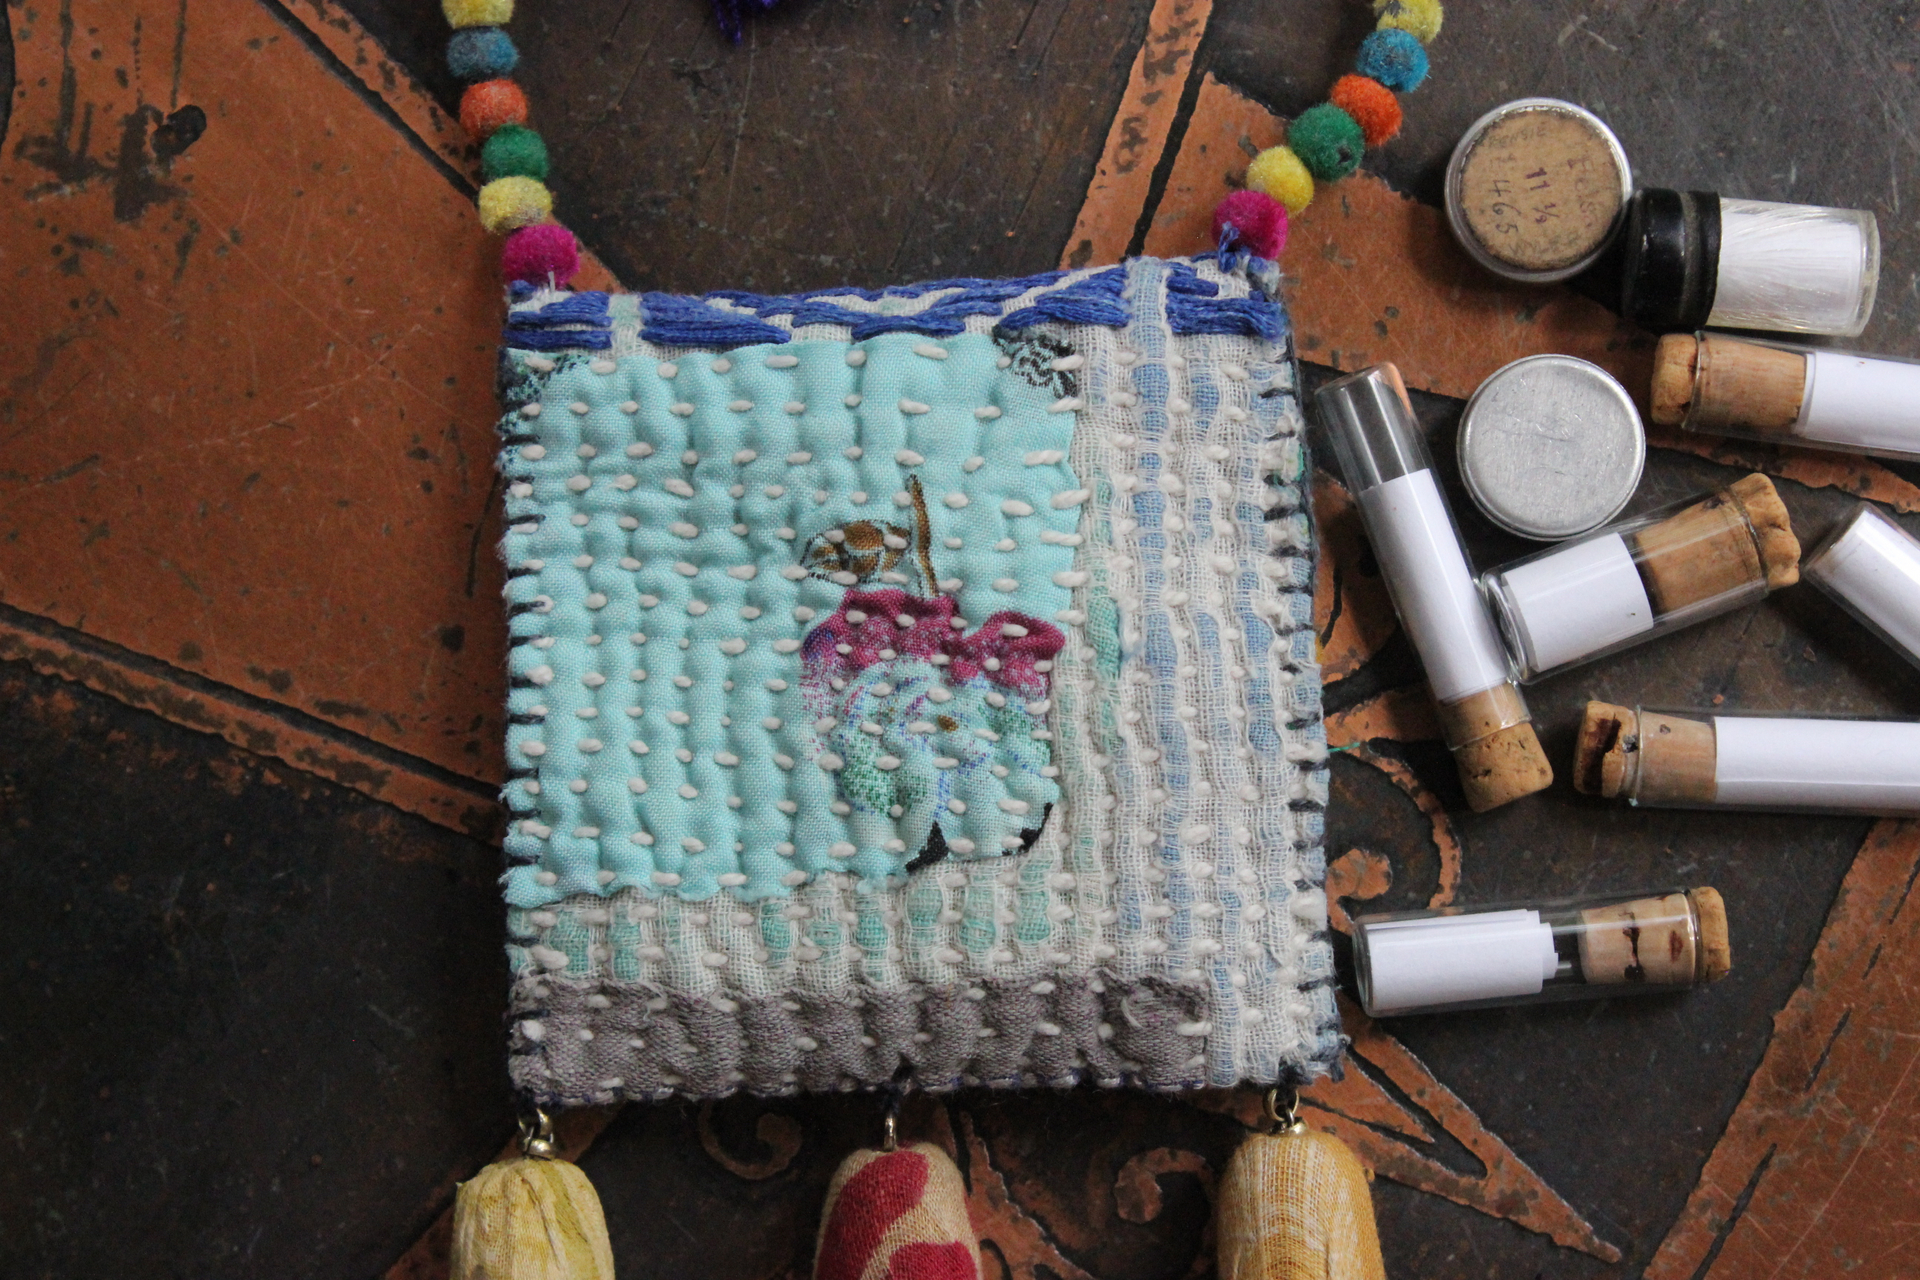 Joy is Prayer Necklace with Antique Kantha Wrapped Beads,Silk Tassels,Hand Stitched Kantha Pouch,9 Antique Watch Part Vessels with Prayer Scrolls